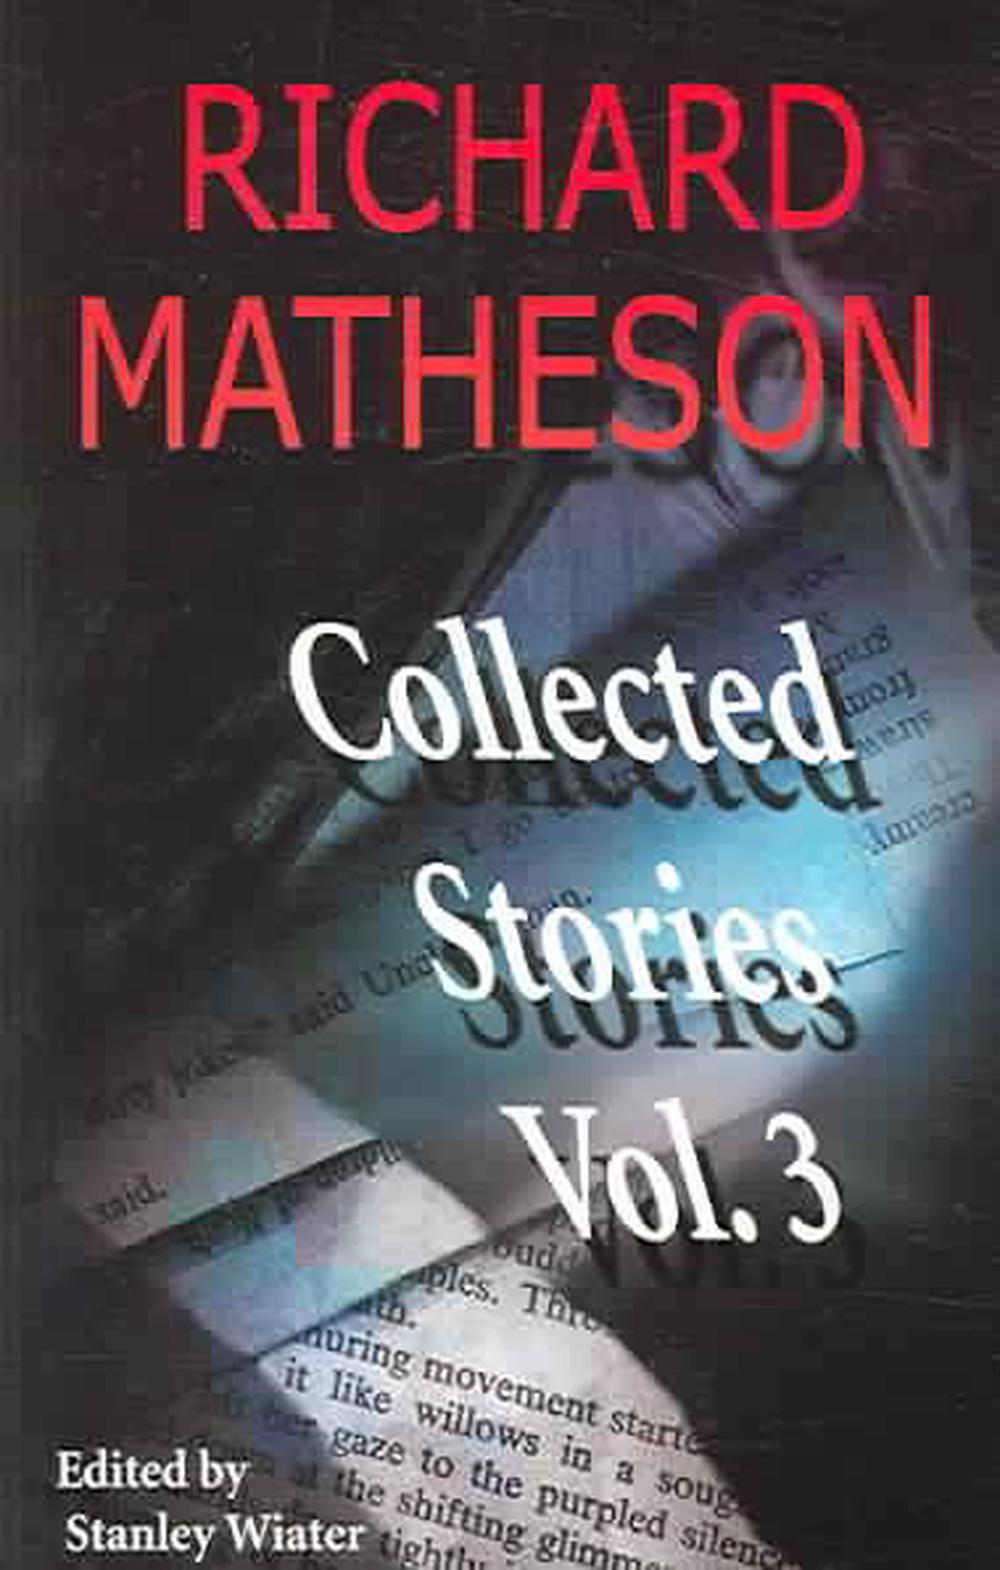 I Am Legend and Other Stories by Richard Matheson